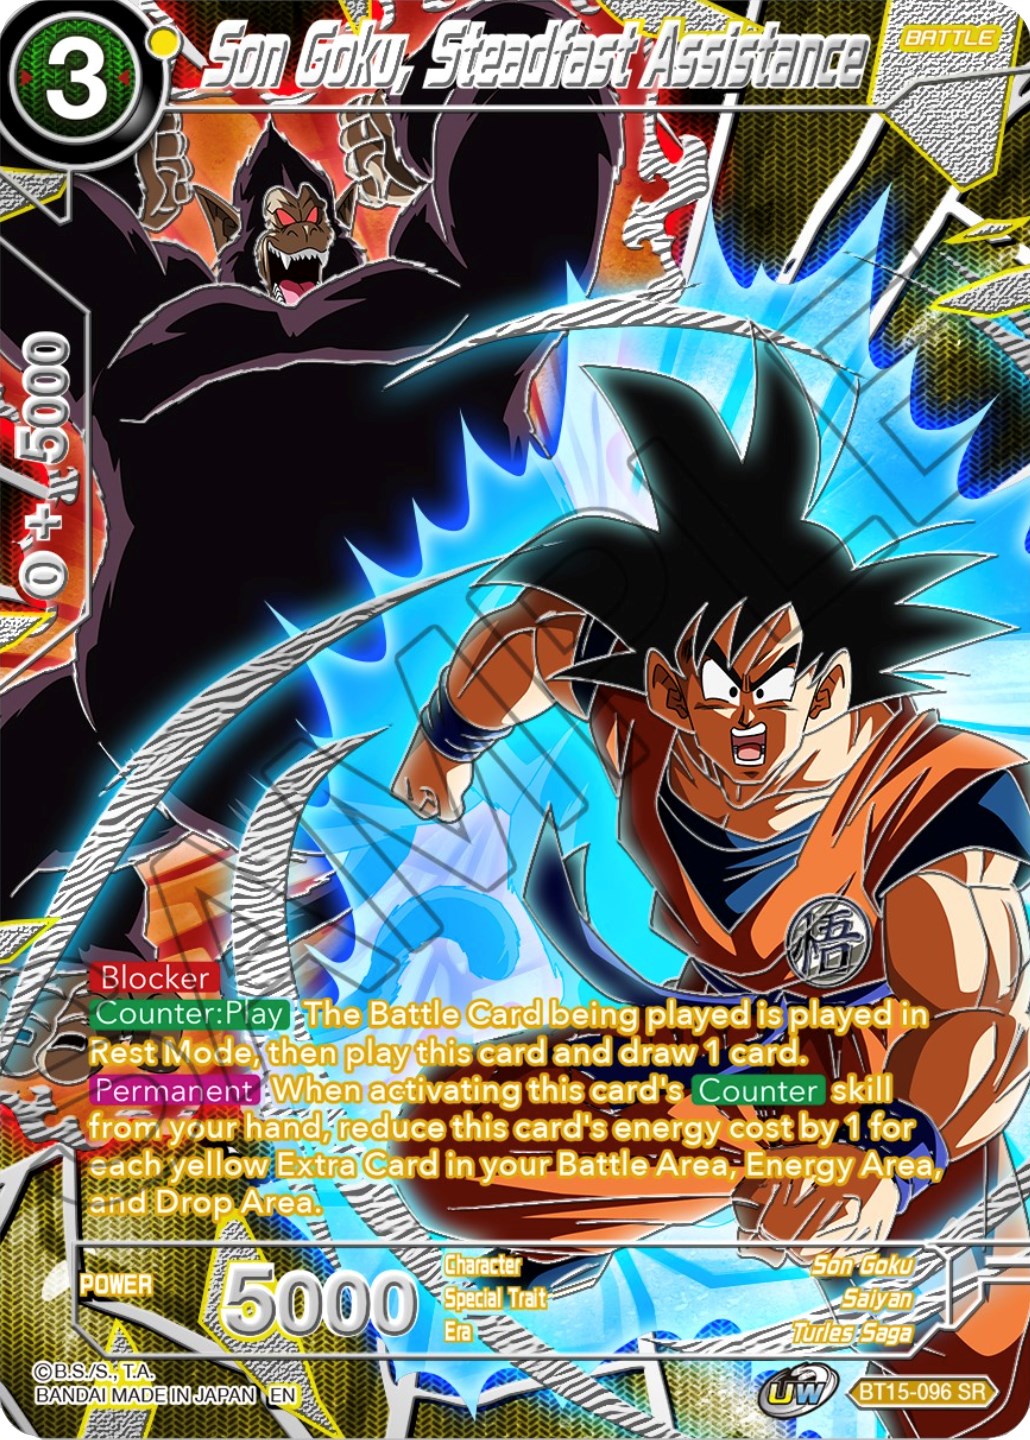 Son Goku, Steadfast Assistance (BT15-096) [Collector's Selection Vol. 3] | North Valley Games